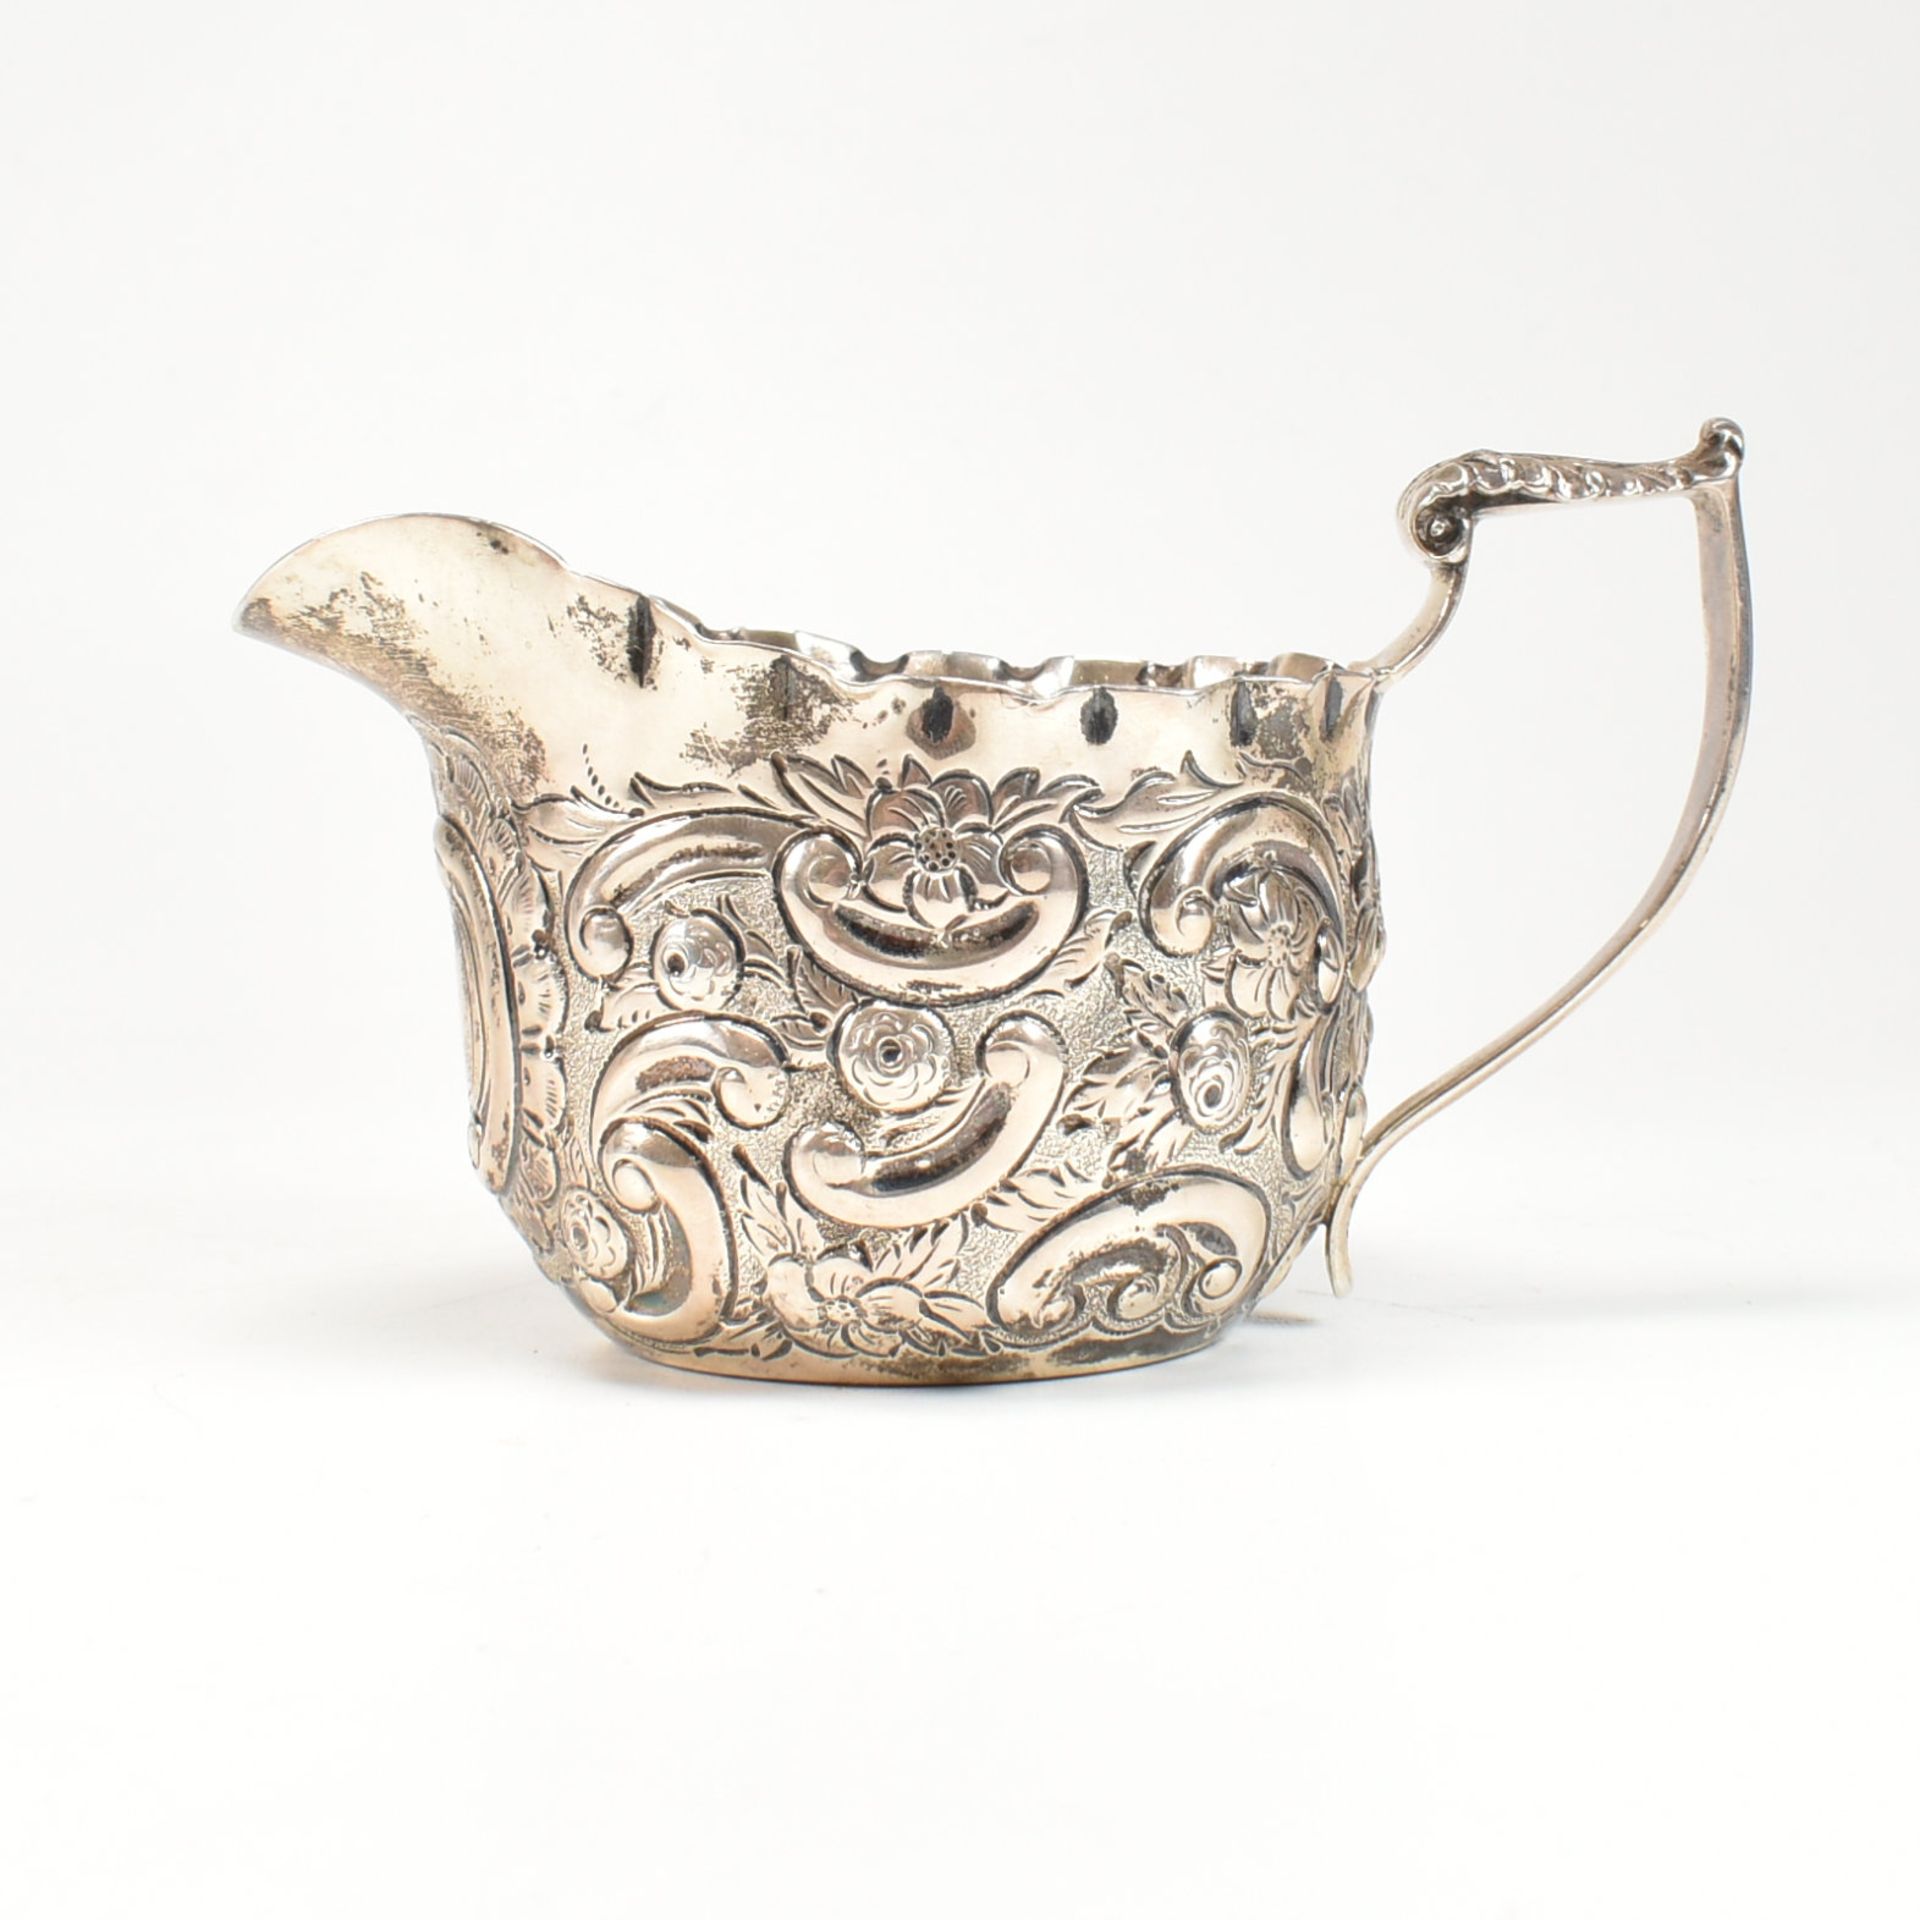 EARLY 20TH CENTURY HALLMARKED SILVER CREAMER - Image 3 of 7